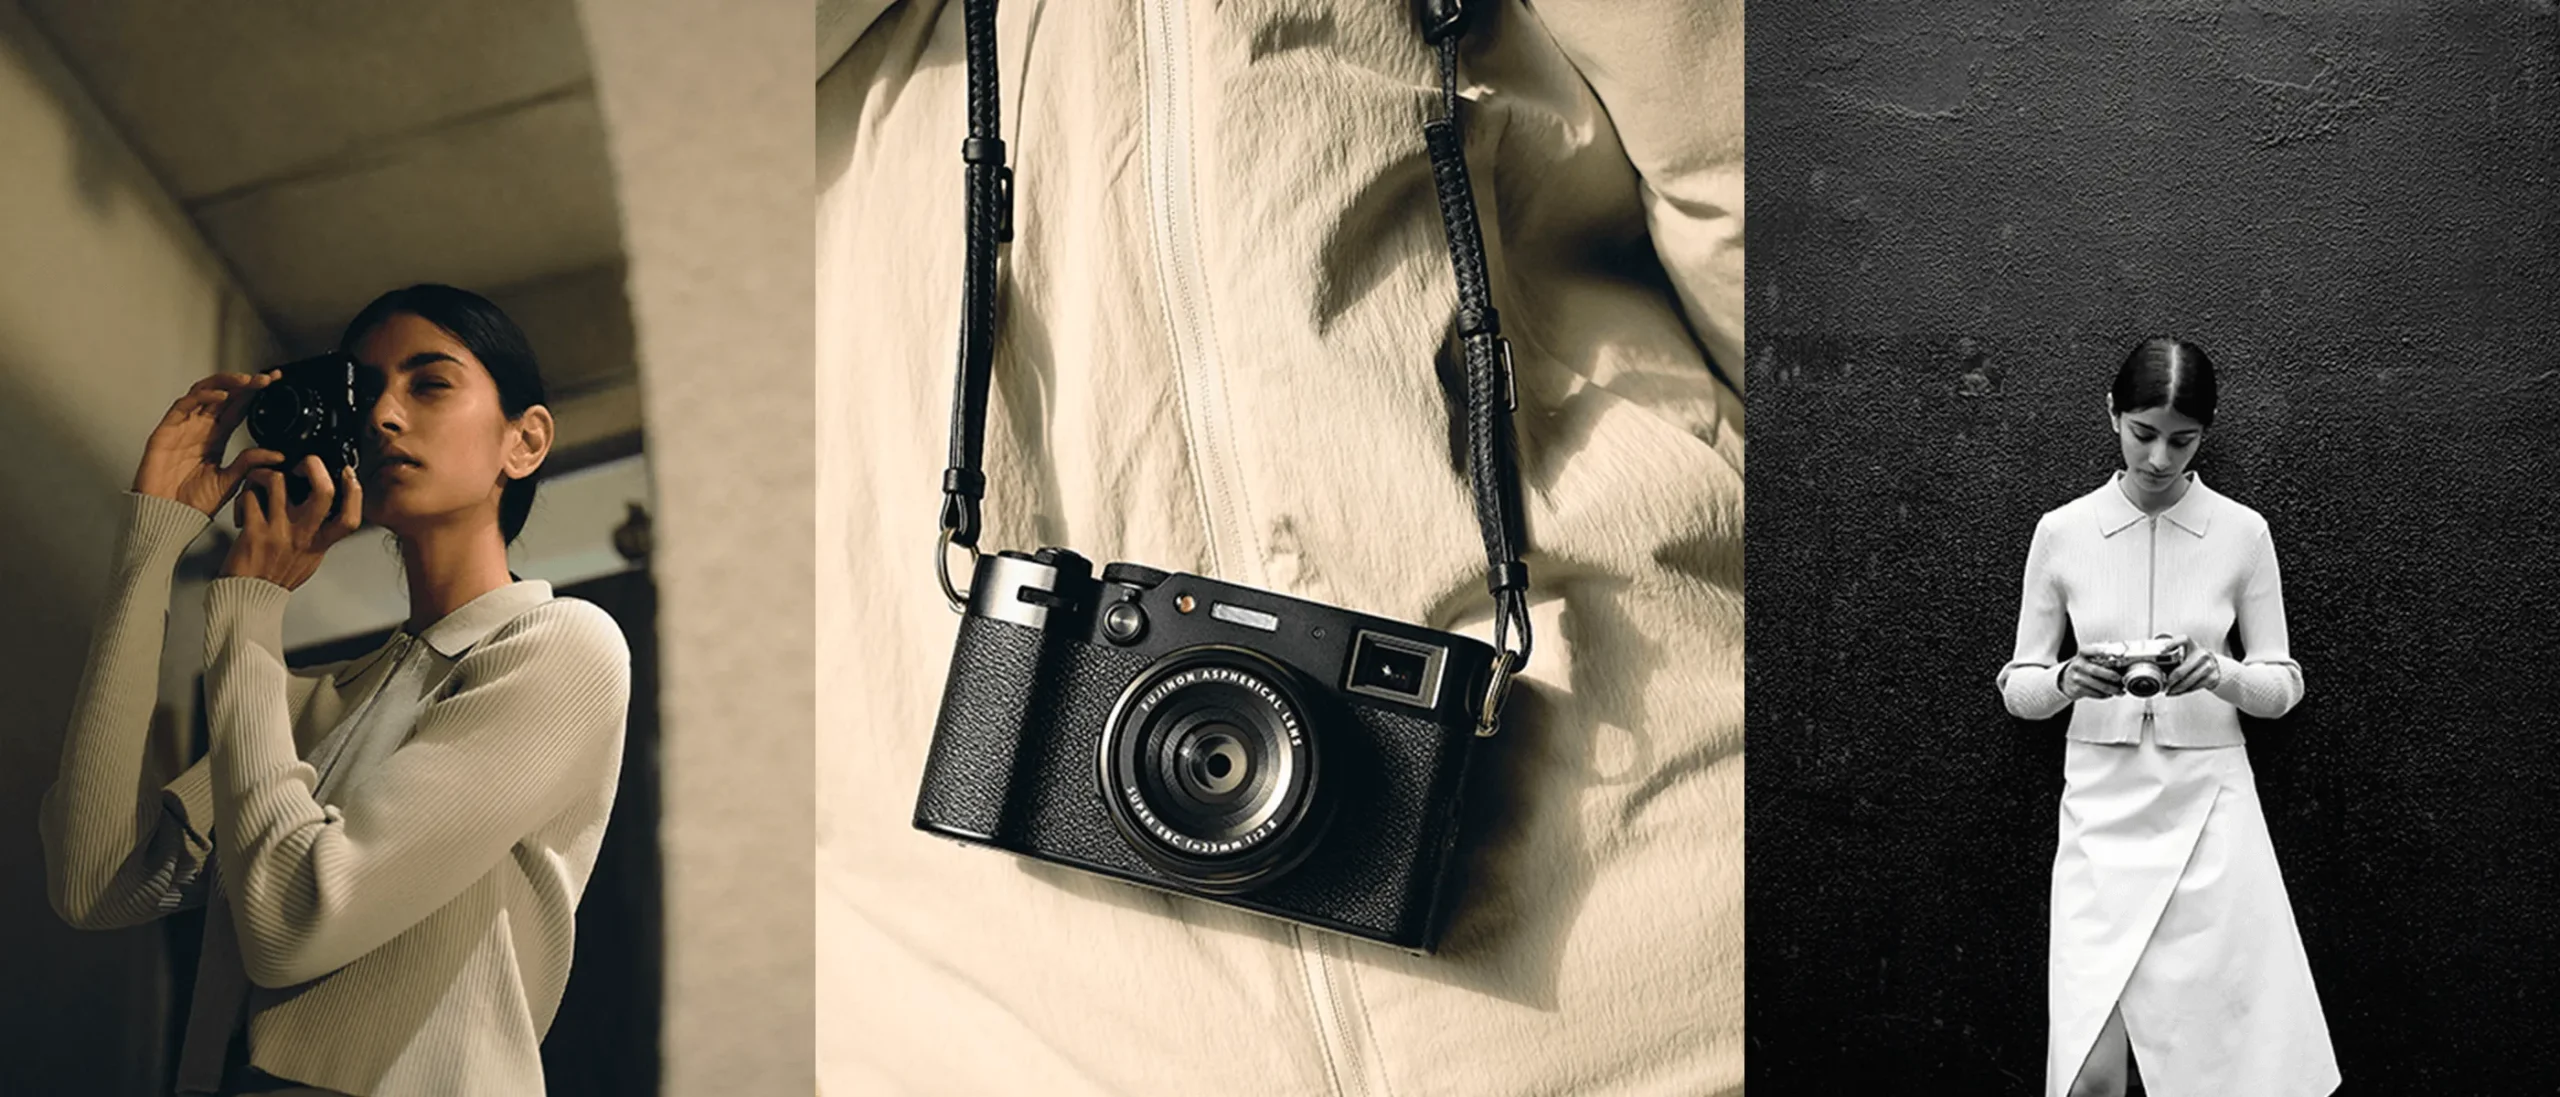 Image 1: A person is focused on taking a photograph, looking through the viewfinder of a Fujifilm X100VI. They are wearing a white ribbed top with a collar, adding a touch of elegance to the act of photography.Image 2: A Fujifilm X100VI with a textured grip and a leather strap is displayed against a neutral-toned fabric, highlighting the camera's design and craftsmanship. Image 3: A monochromatic image featuring a person dressed in a tailored white dress with a collar, standing against a textured dark wall, engrossed in examining a Fujifilm X100VI in their hands.